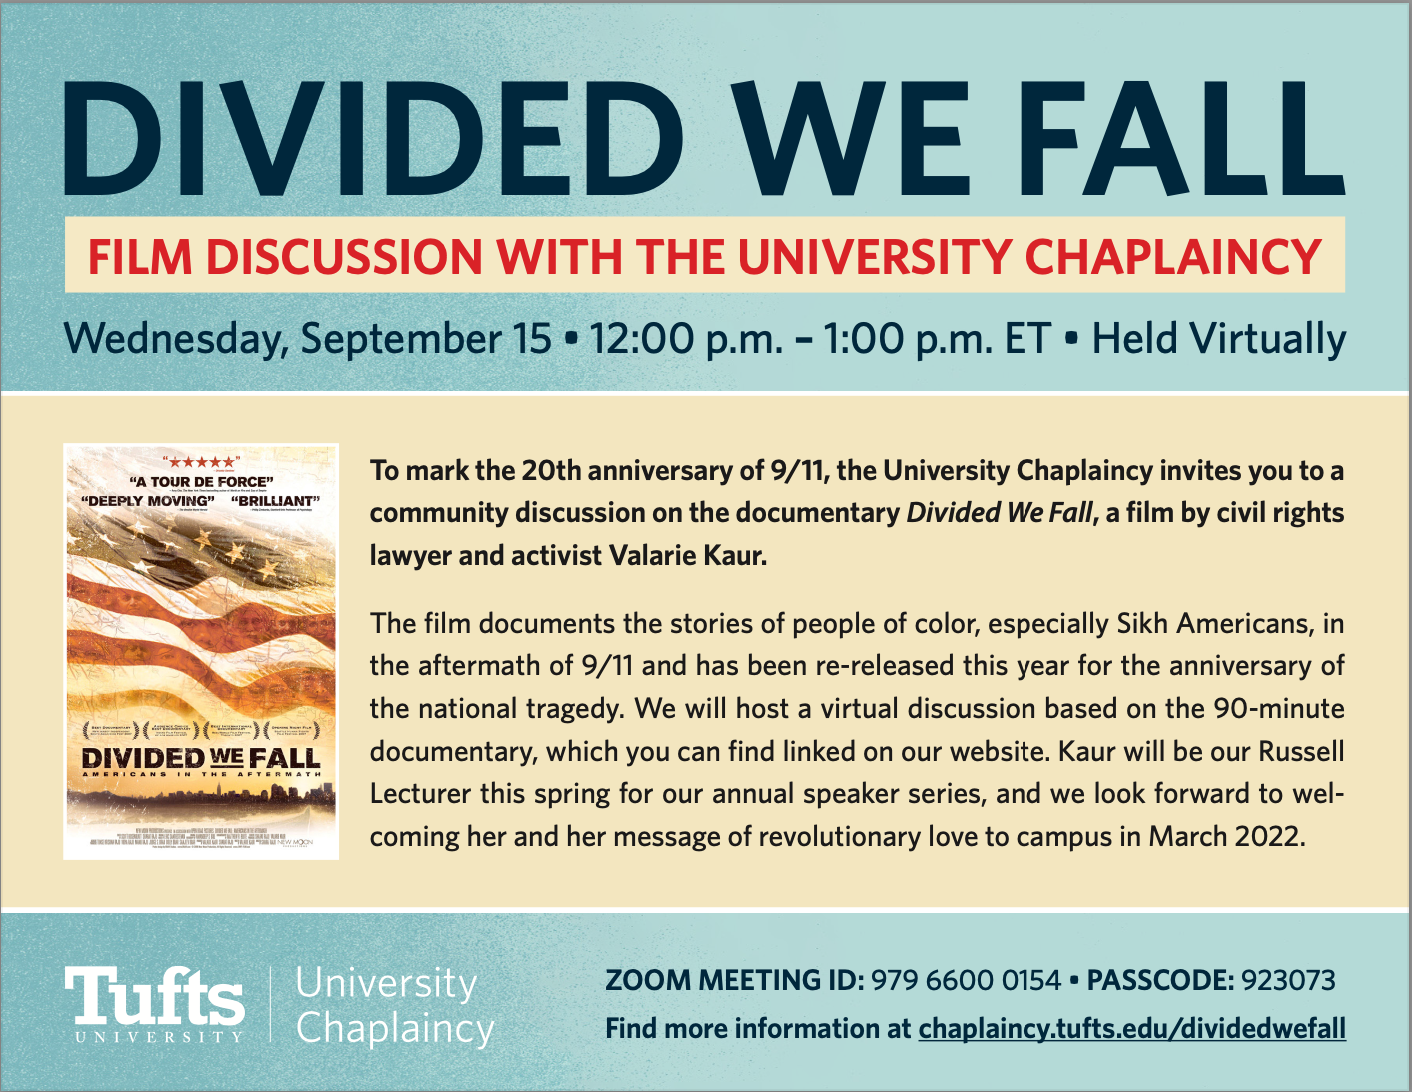 Divided We Fall Film Discussion Sept 15 12-1